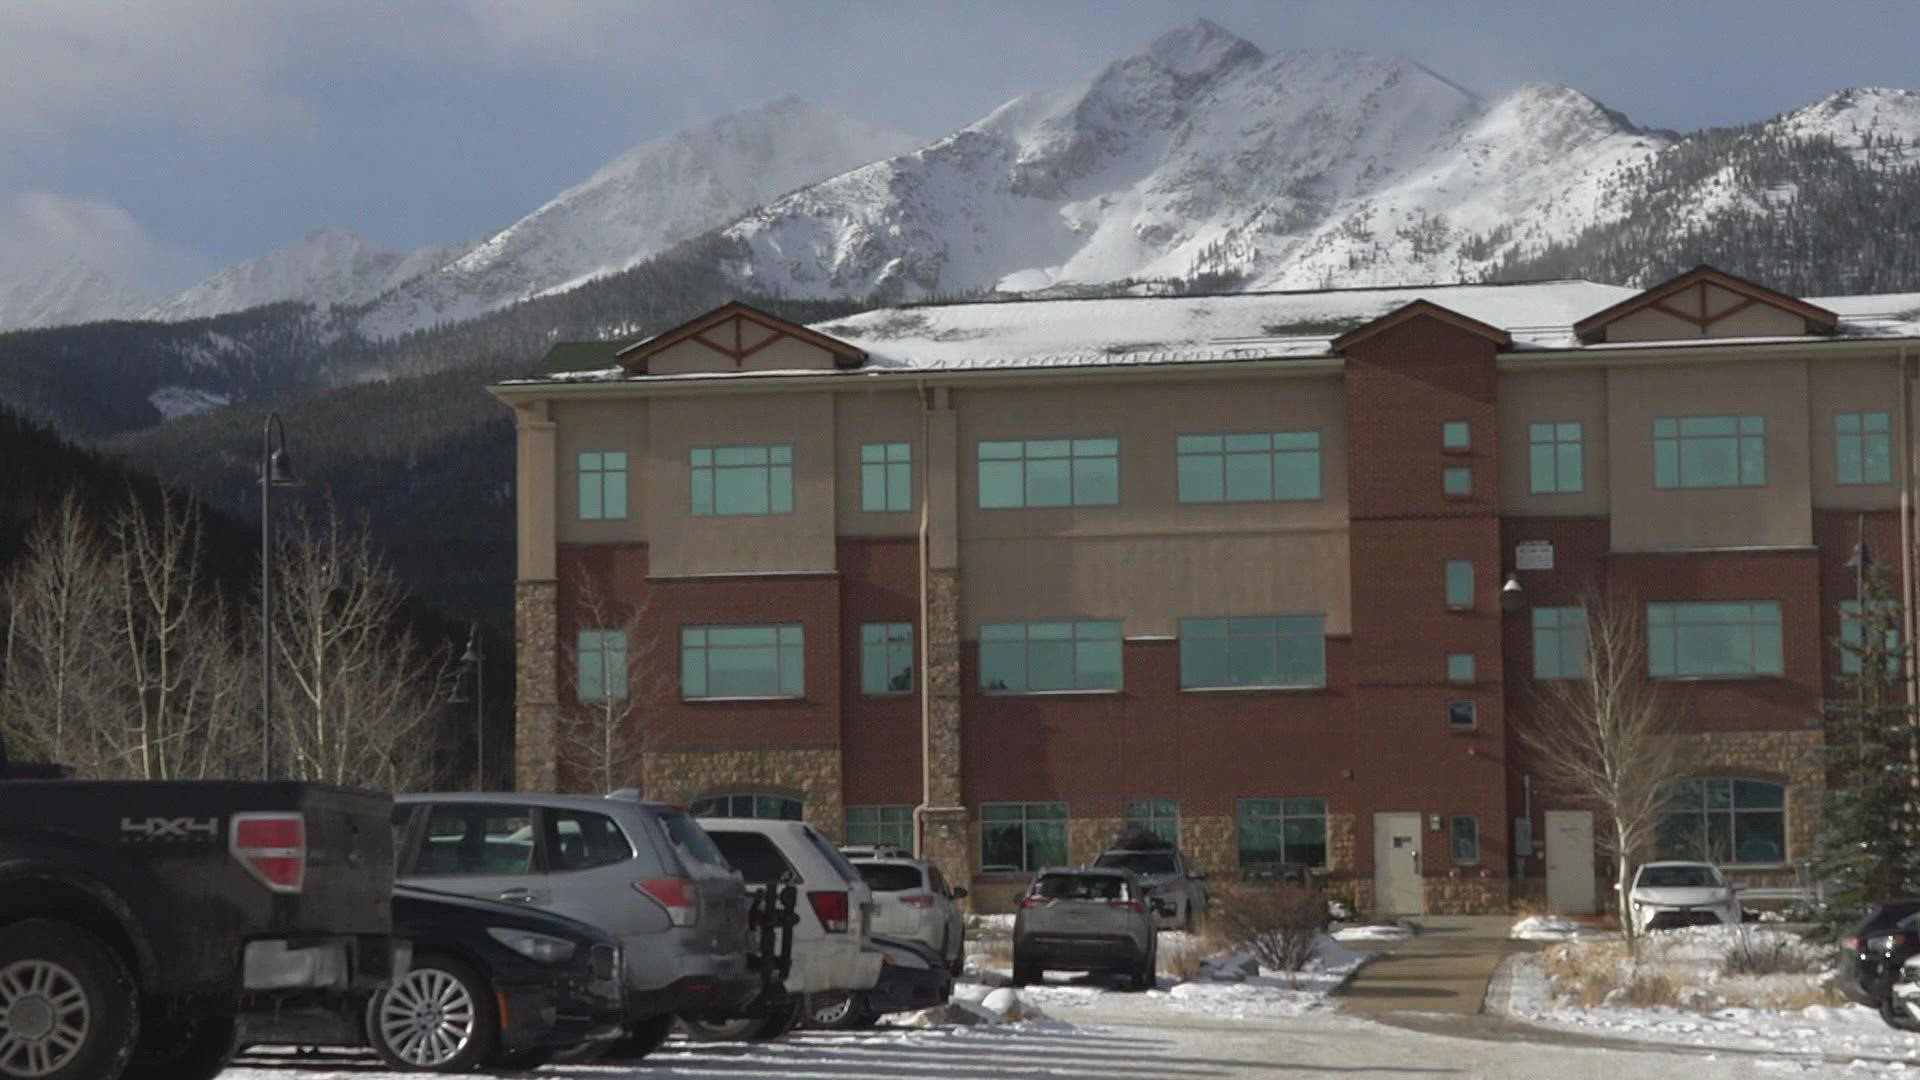 Doctors in Summit County have started a High Altitude Research Center to study the impacts living at high elevation has on the body.